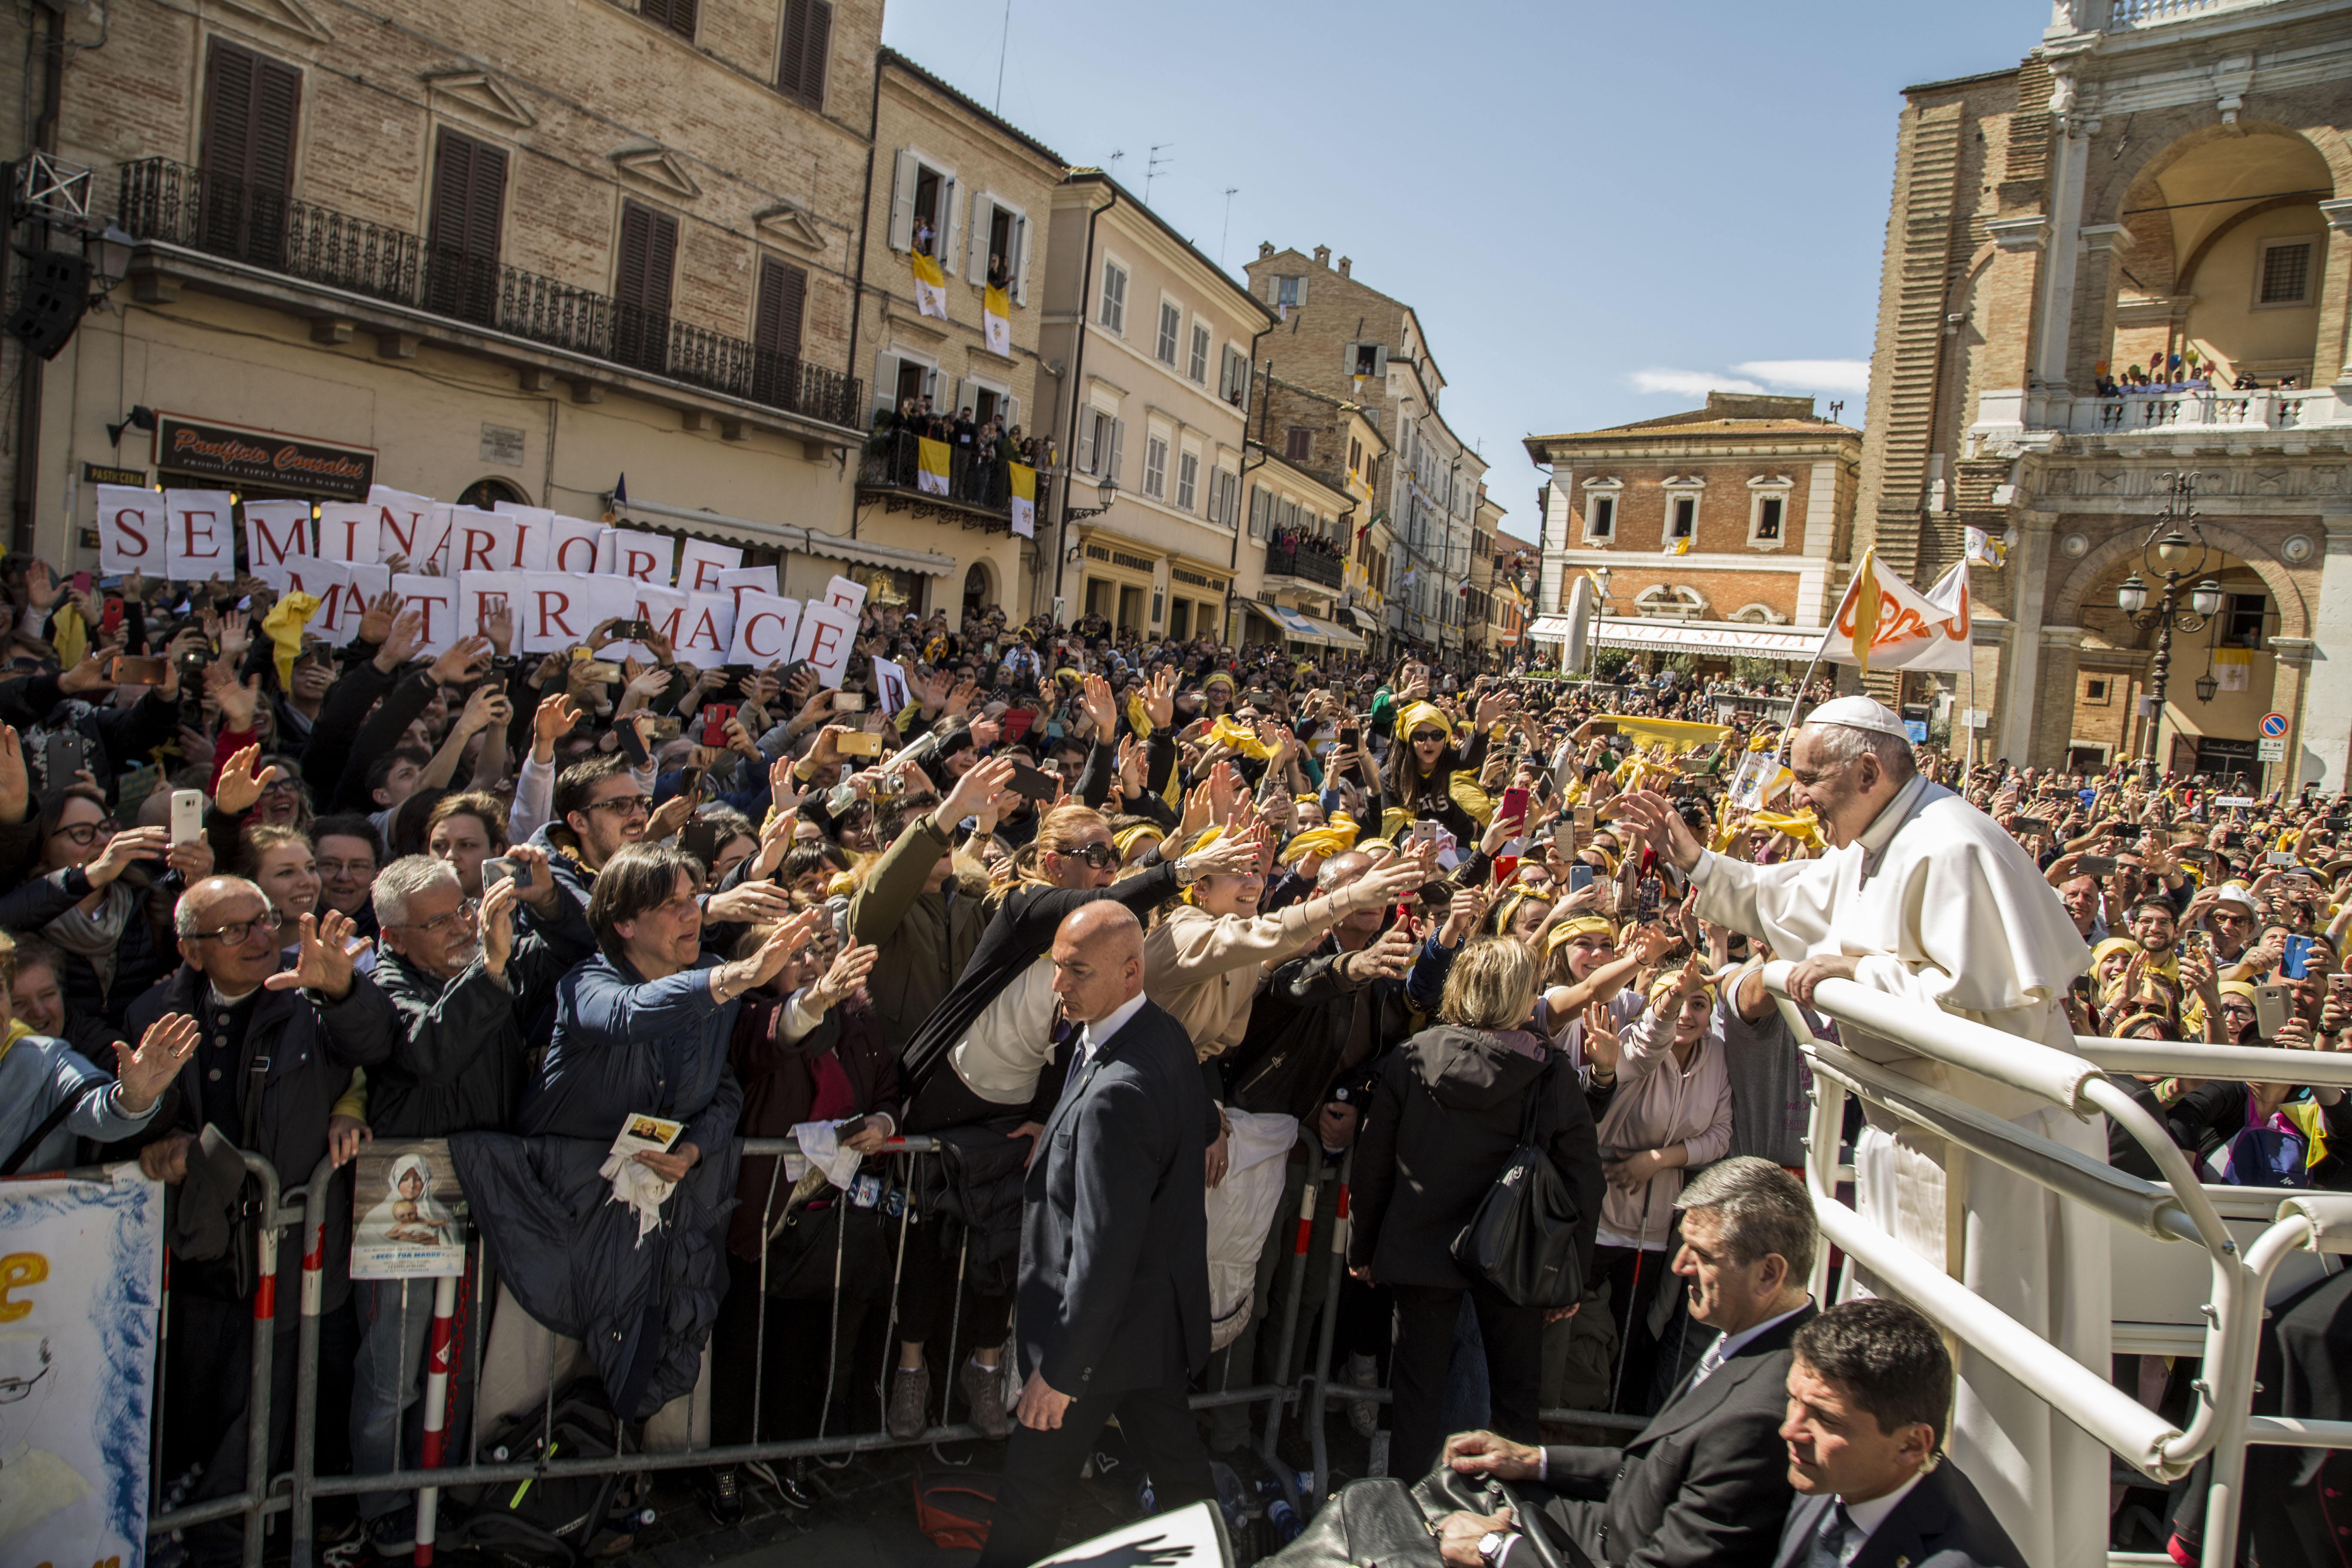 The photos of the Pope in Loreto